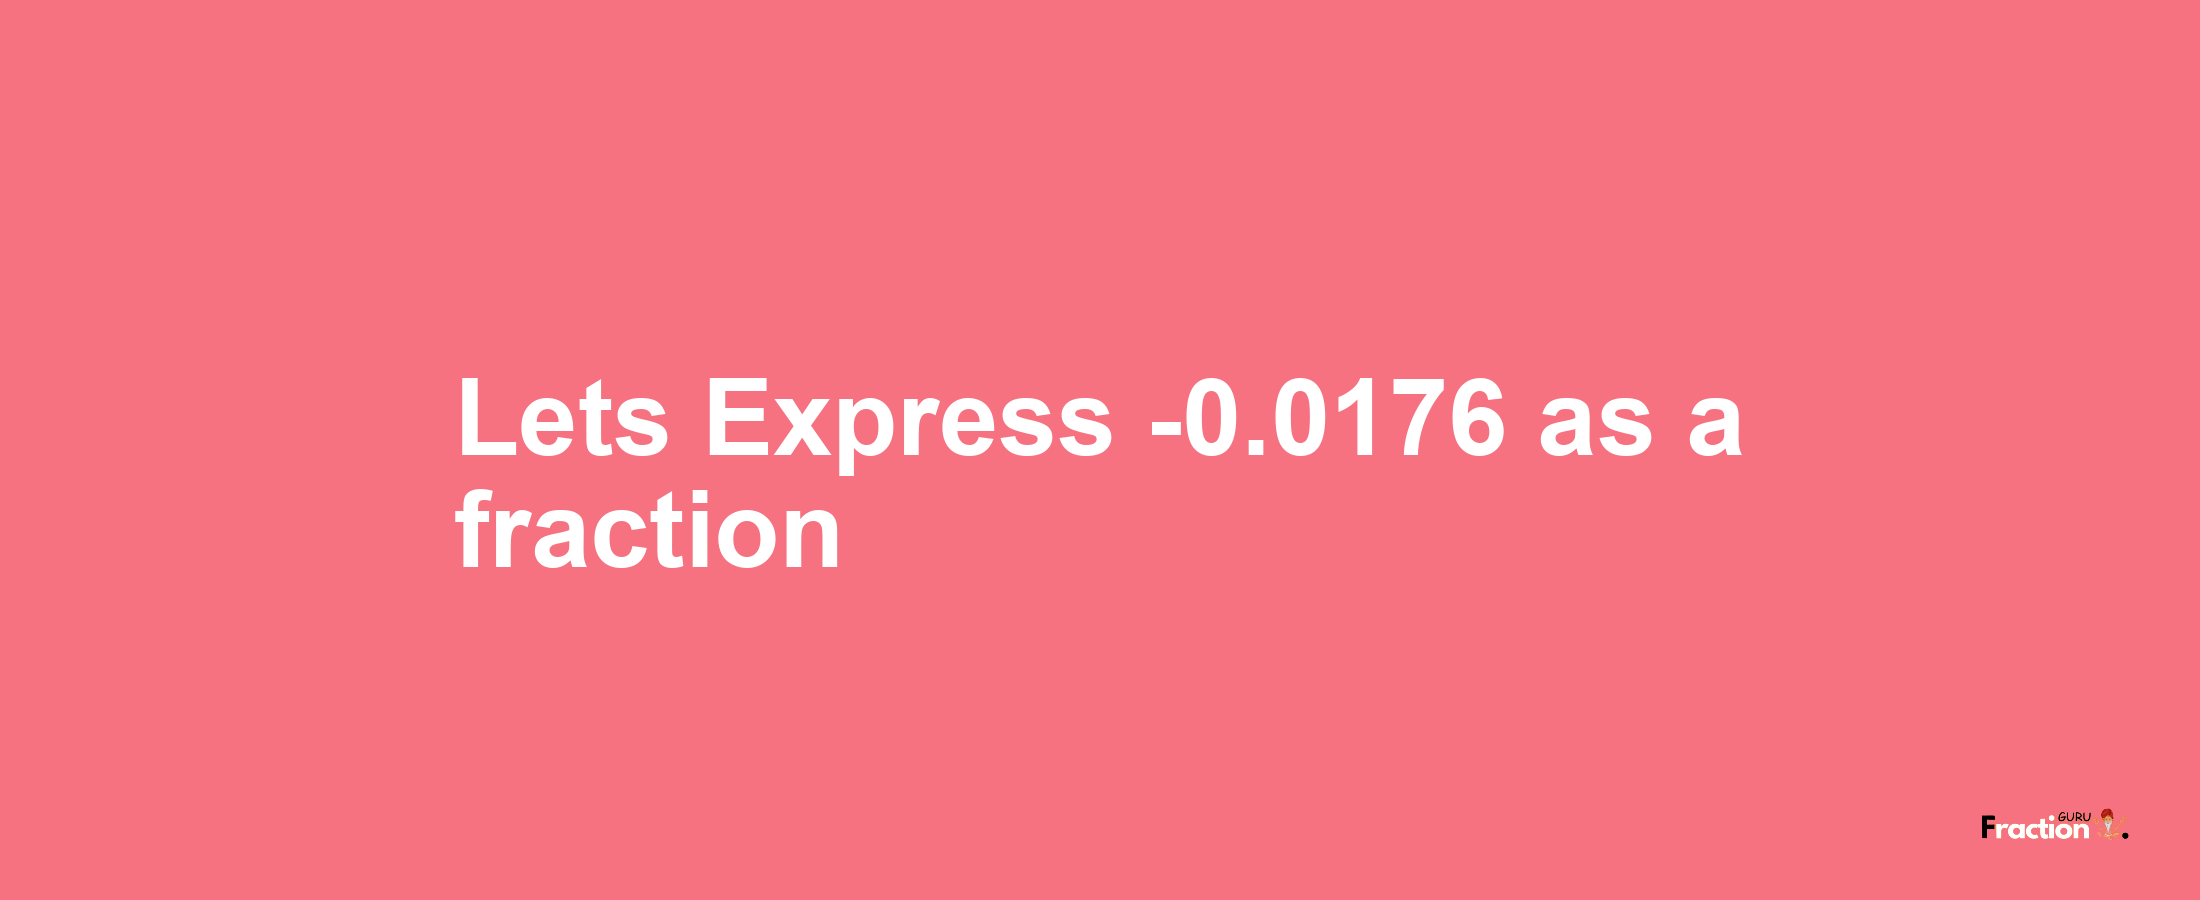 Lets Express -0.0176 as afraction